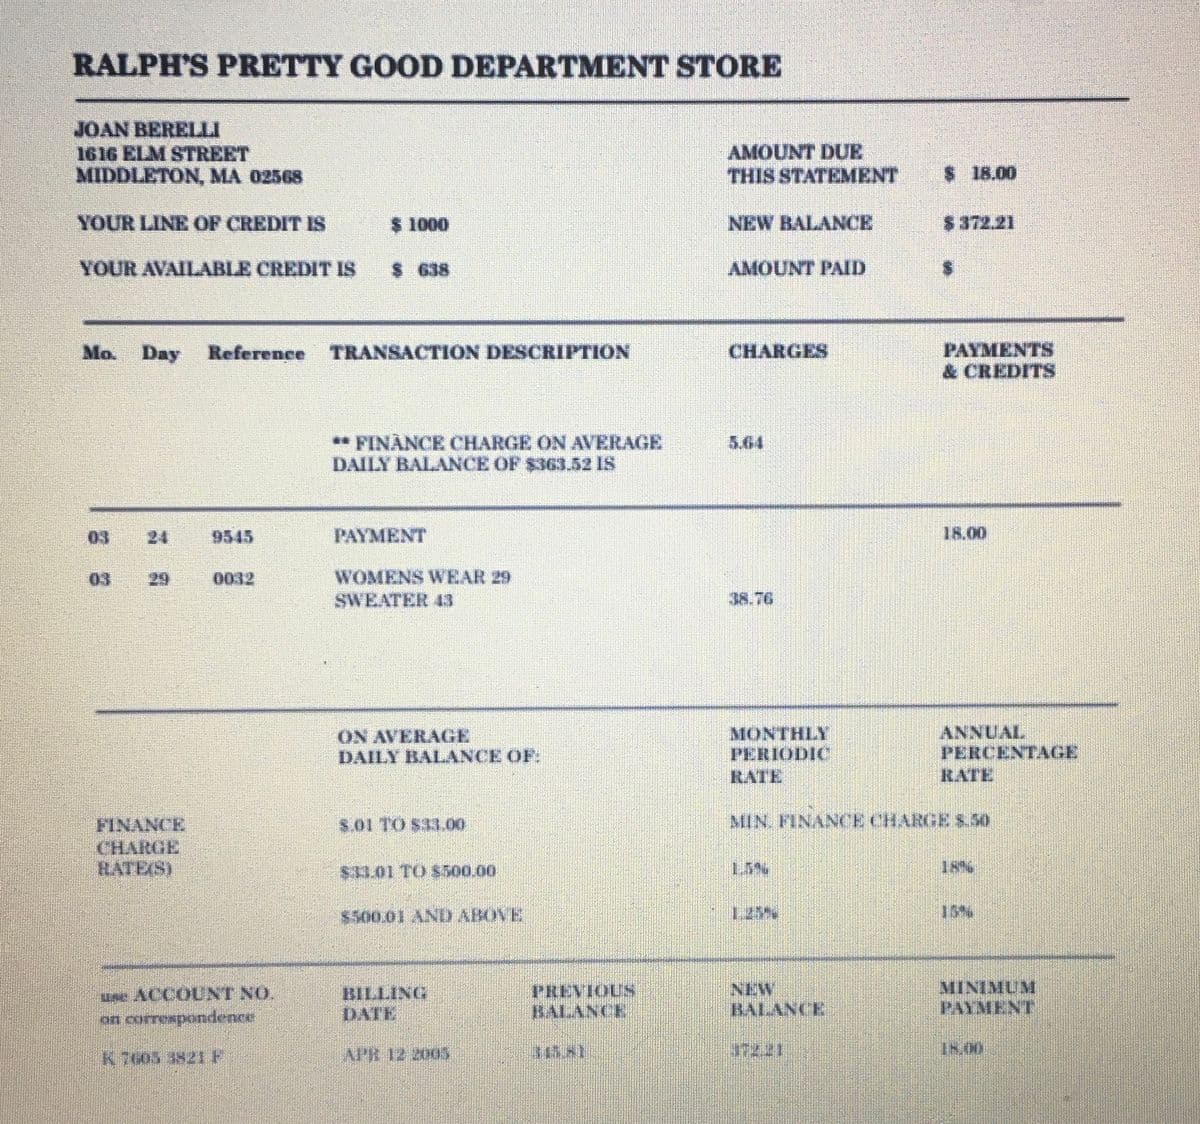 RALPH'S PRETTY GOOD DEPARTMENT STORE
JOAN BERELLI
1616 ELM STREET
MIDDLETON, MA 02568
YOUR LINE OF CREDIT IS
YOUR AVAILABLE CREDIT IS
Mo. Day
FINANCE
CHARGE
HATES)
9545
Reference TRANSACTION DESCRIPTION
0012
$ 1000
use ACCOUNT NO.
on correspondence
K7605 3821 F
$ 638
** FINANCE CHARGE ON AVERAGE
DAILY BALANCE OF $363.52 IS
PAYMENT
WOMENS WEAR 29
SWEATER 43
ON AVERAGE
DAILY BALANCE OF:
5.01 TO $31.00
$31.01 TO $500.00
$500,01 AND ABOVE
BILLING
DATE
APR 12 2005
PREVIOUS
BALANCE
AMOUNT DUE
THIS STATEMENT
NEW BALANCE
AMOUNT PAID
CHARGES
5.64
MONTHLY
PERIODIC
RATE
$18.00
BALANCE
$ 372.21
PAYMENTS
& CREDITS
18.00
ANNUAL
PERCENTAGE
RATE
MIN FINANCE CHARGE $.50
MINIMUM
PAYMENT